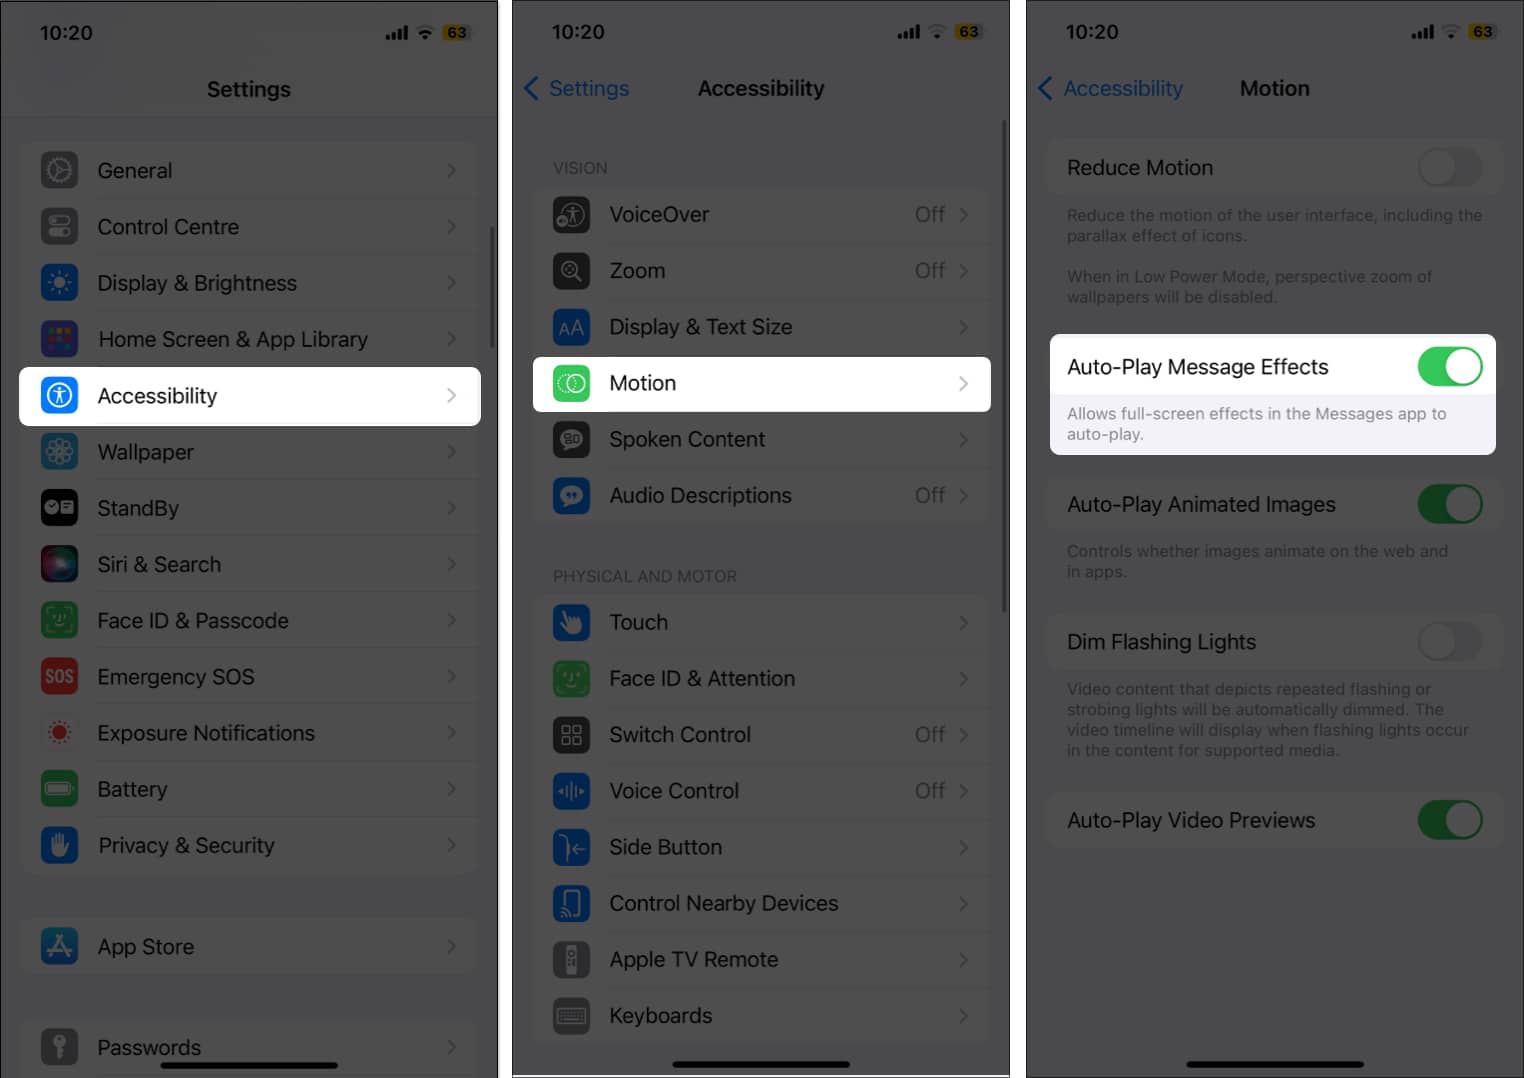 Open Settings, Go to Accessibility, Tap Motion, and Turn on Auto-Play Message Effects